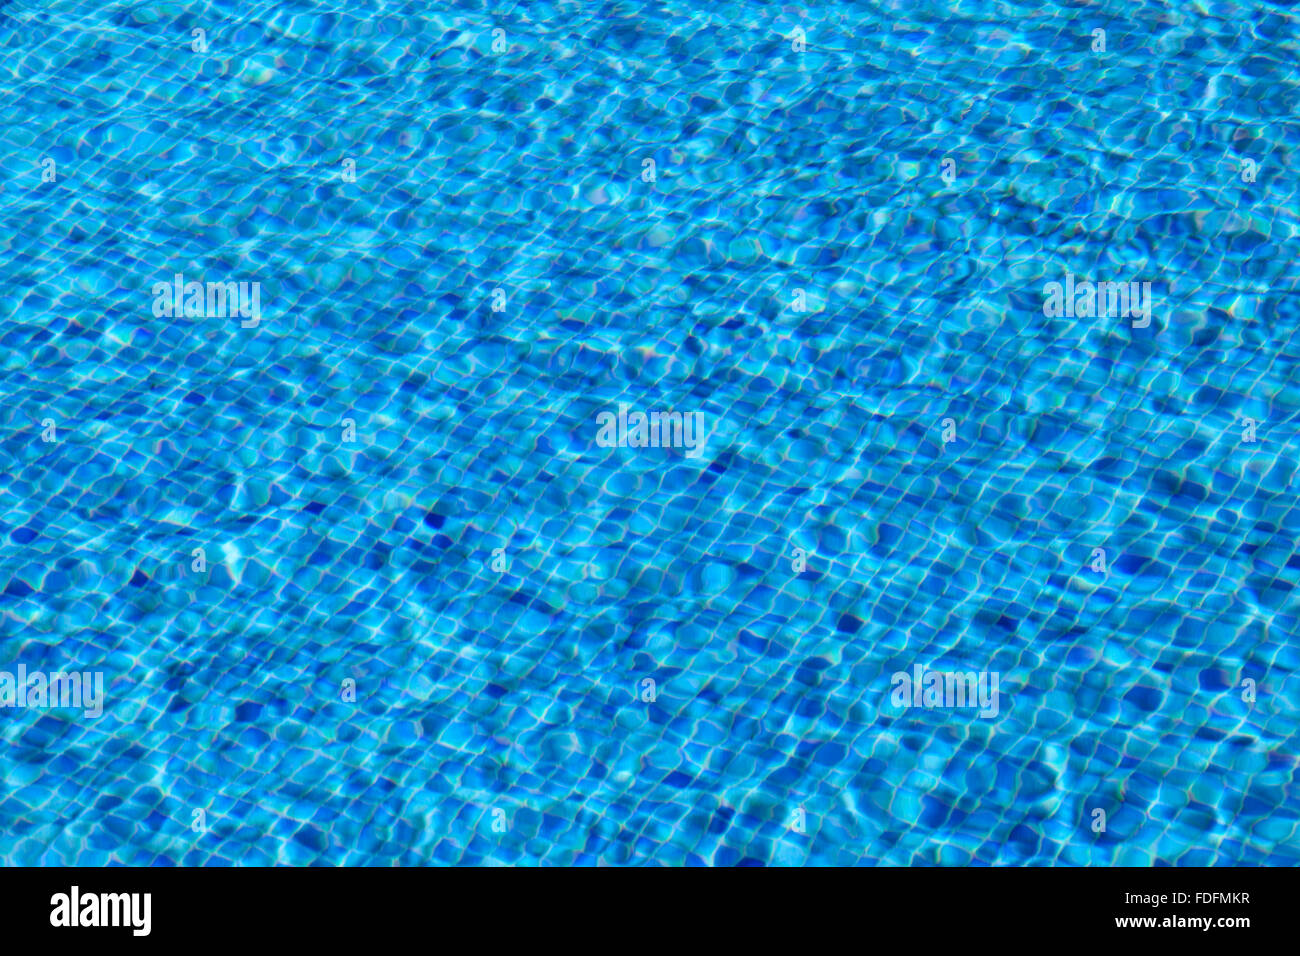 Water, pool, swimming pool, background Stock Photo